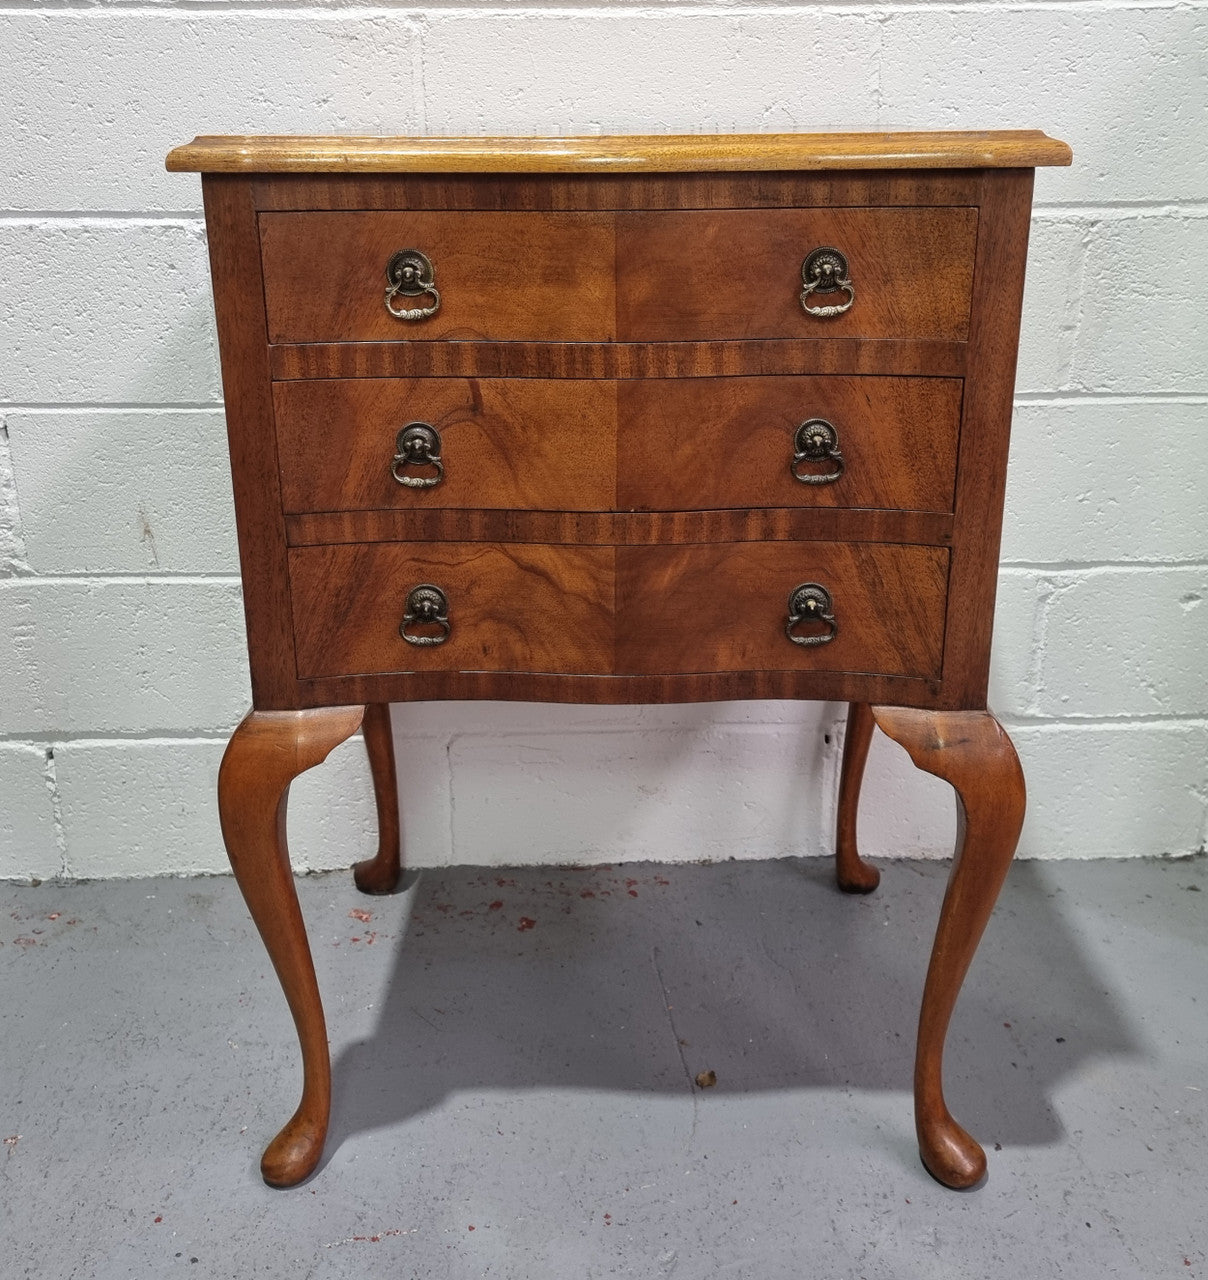 Antique Queen Anne style figured Walnut Bedside cabinet with 3 drawers. It is in good original detailed condition.